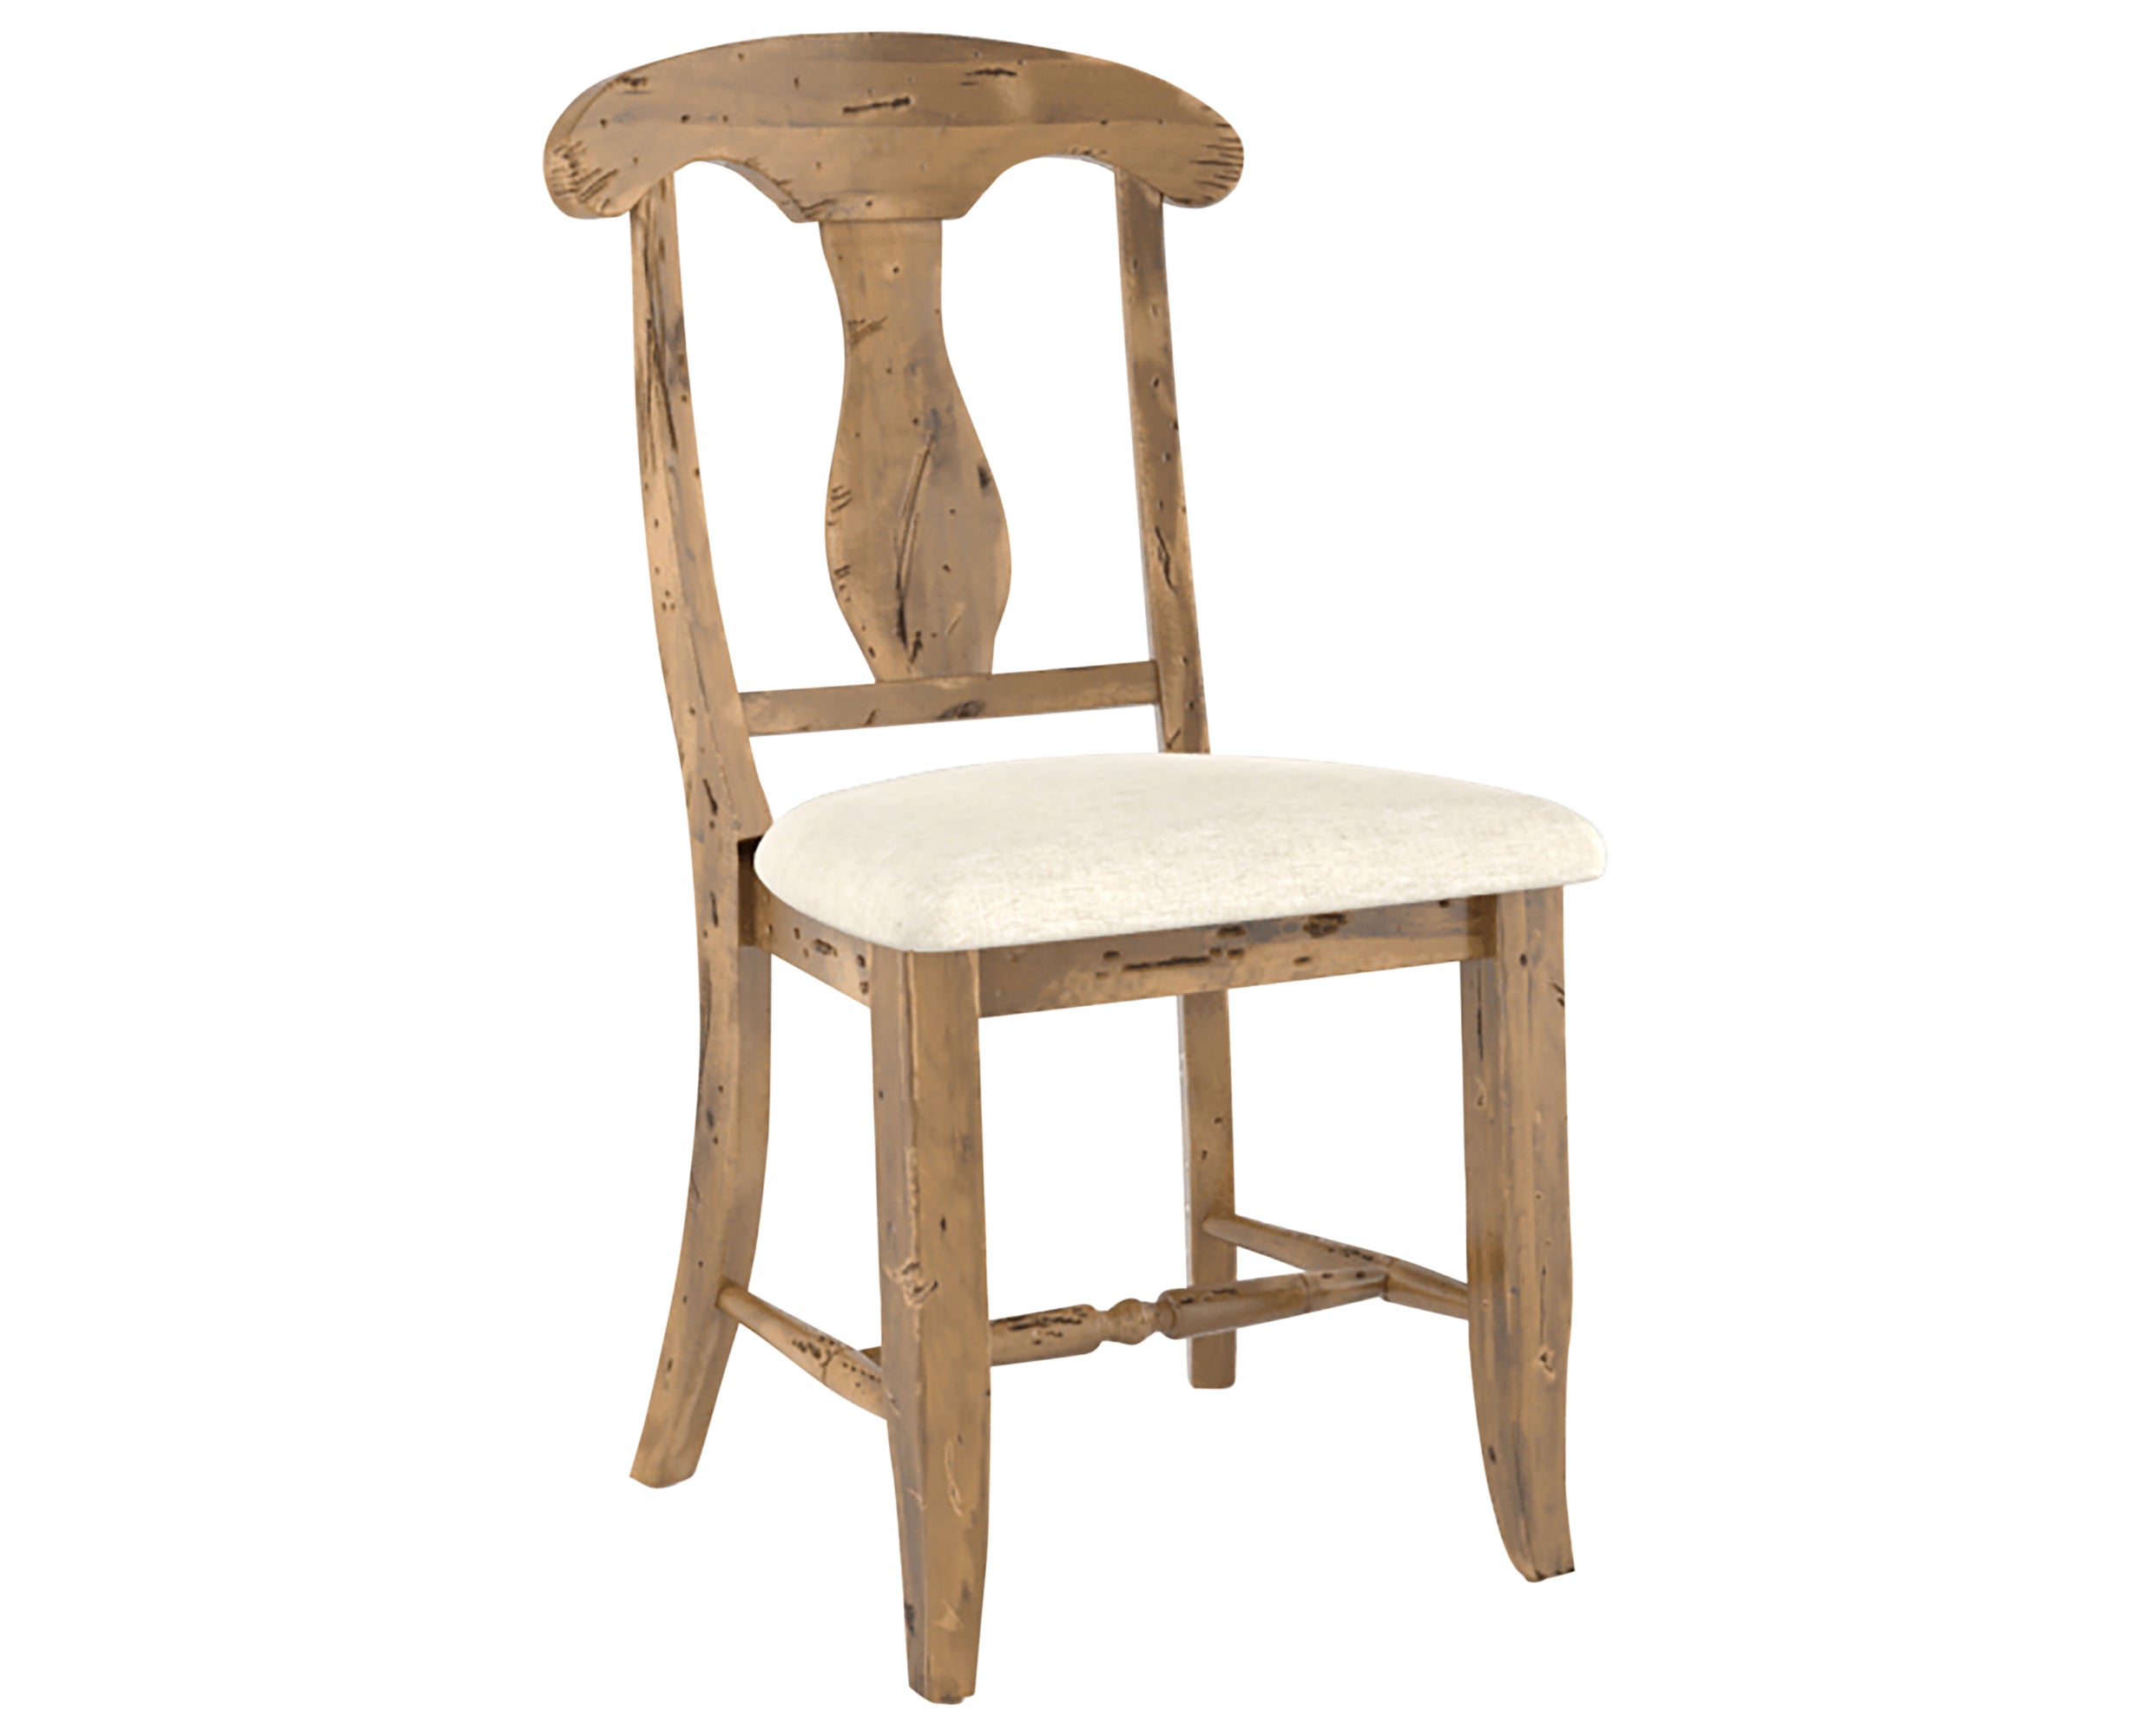 Oak Washed and Fabric TW | Canadel Champlain Dining Chair 0600 | Valley Ridge Furniture